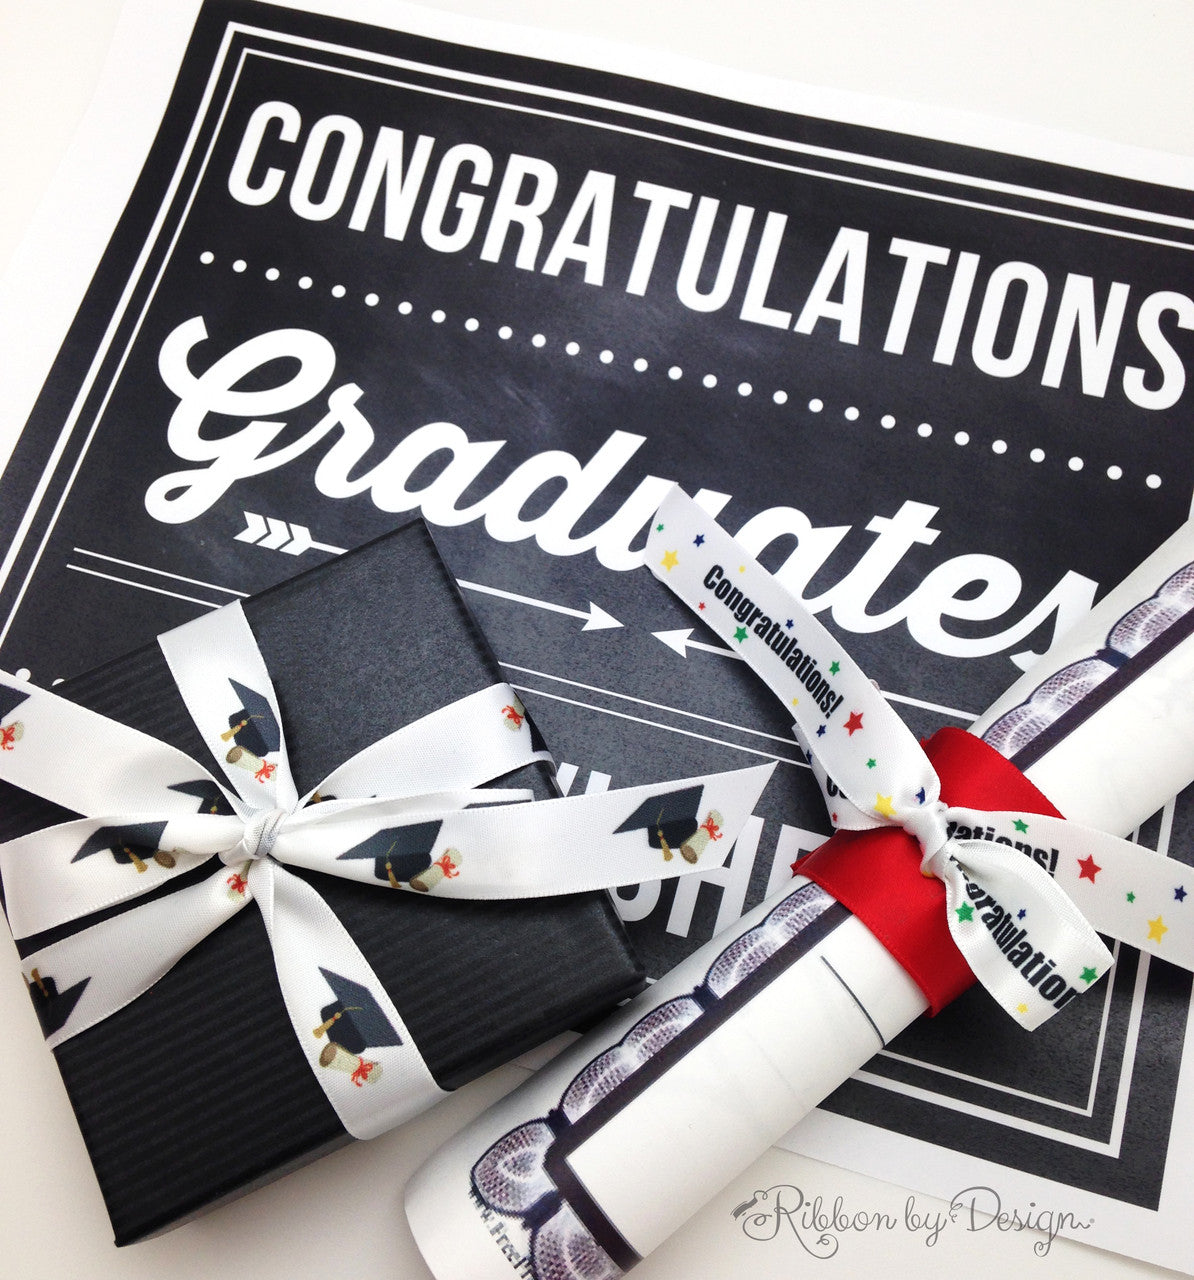 Set in combination with our congratulations ribbon, our grad hats will make the graduate feel more special!